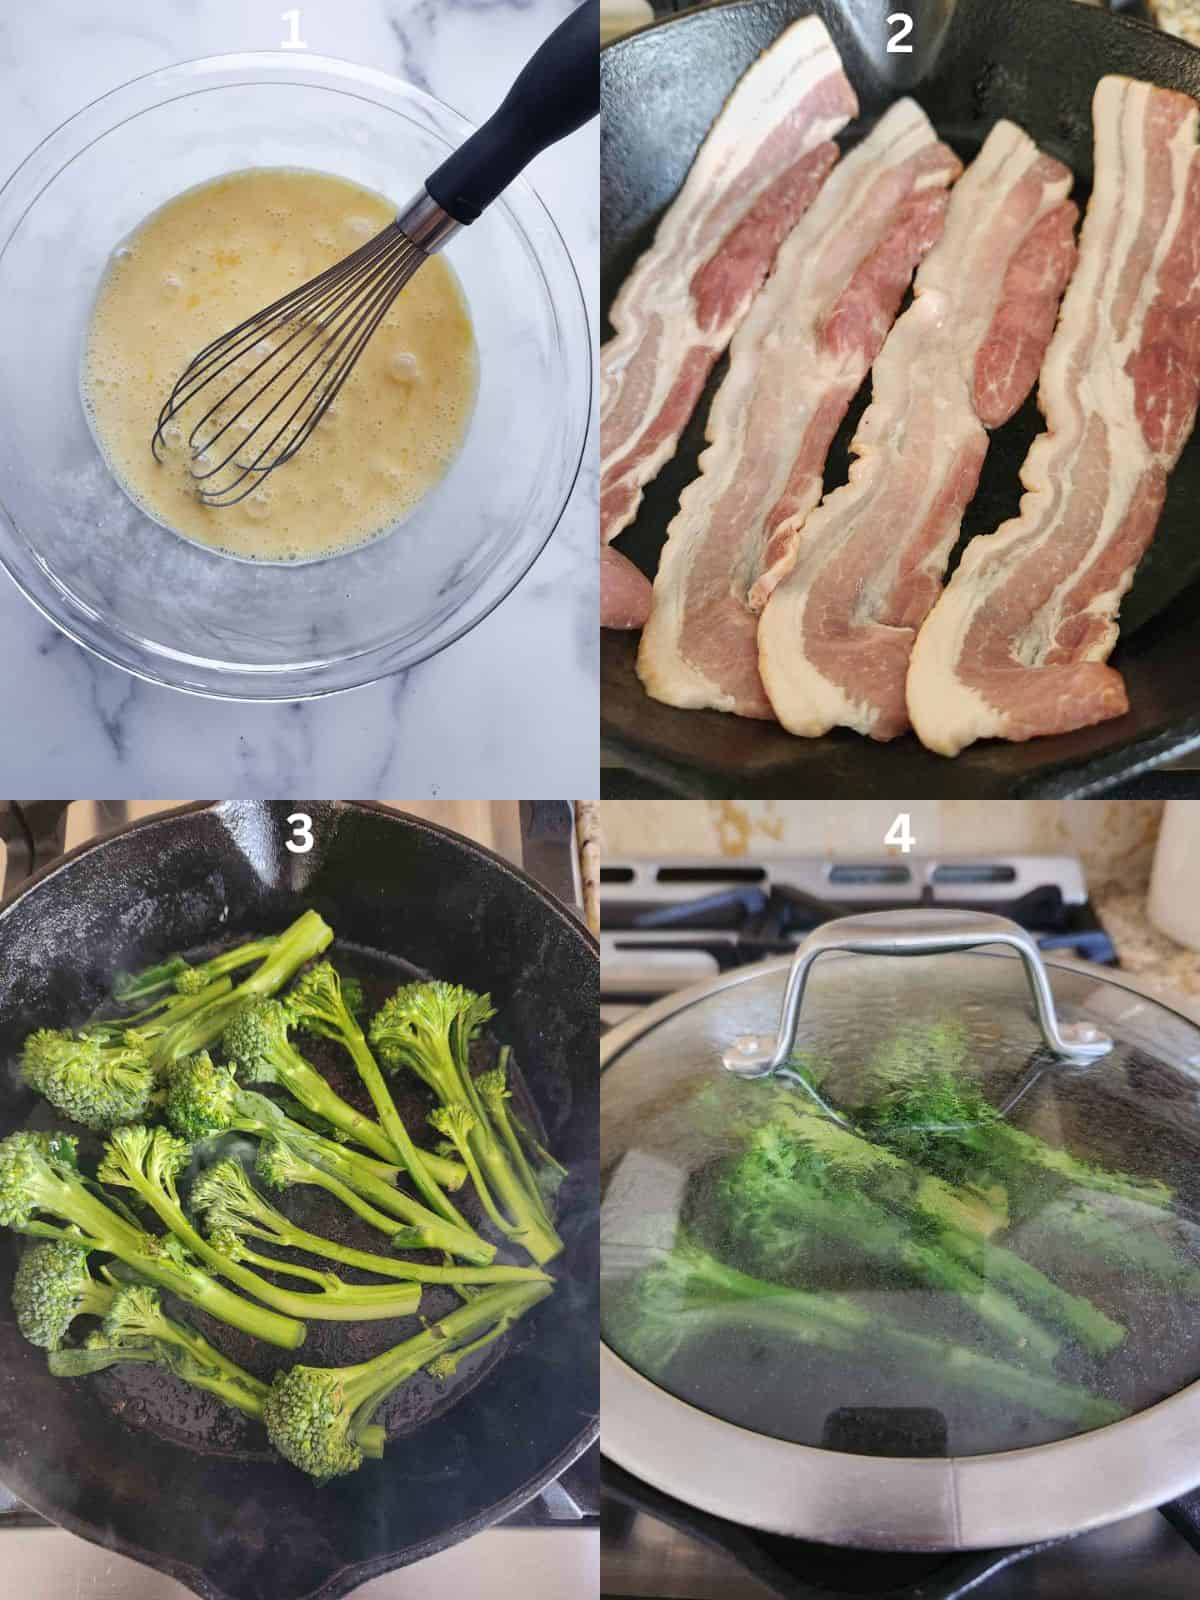 Steps to make broccolini, numbered from one to four.